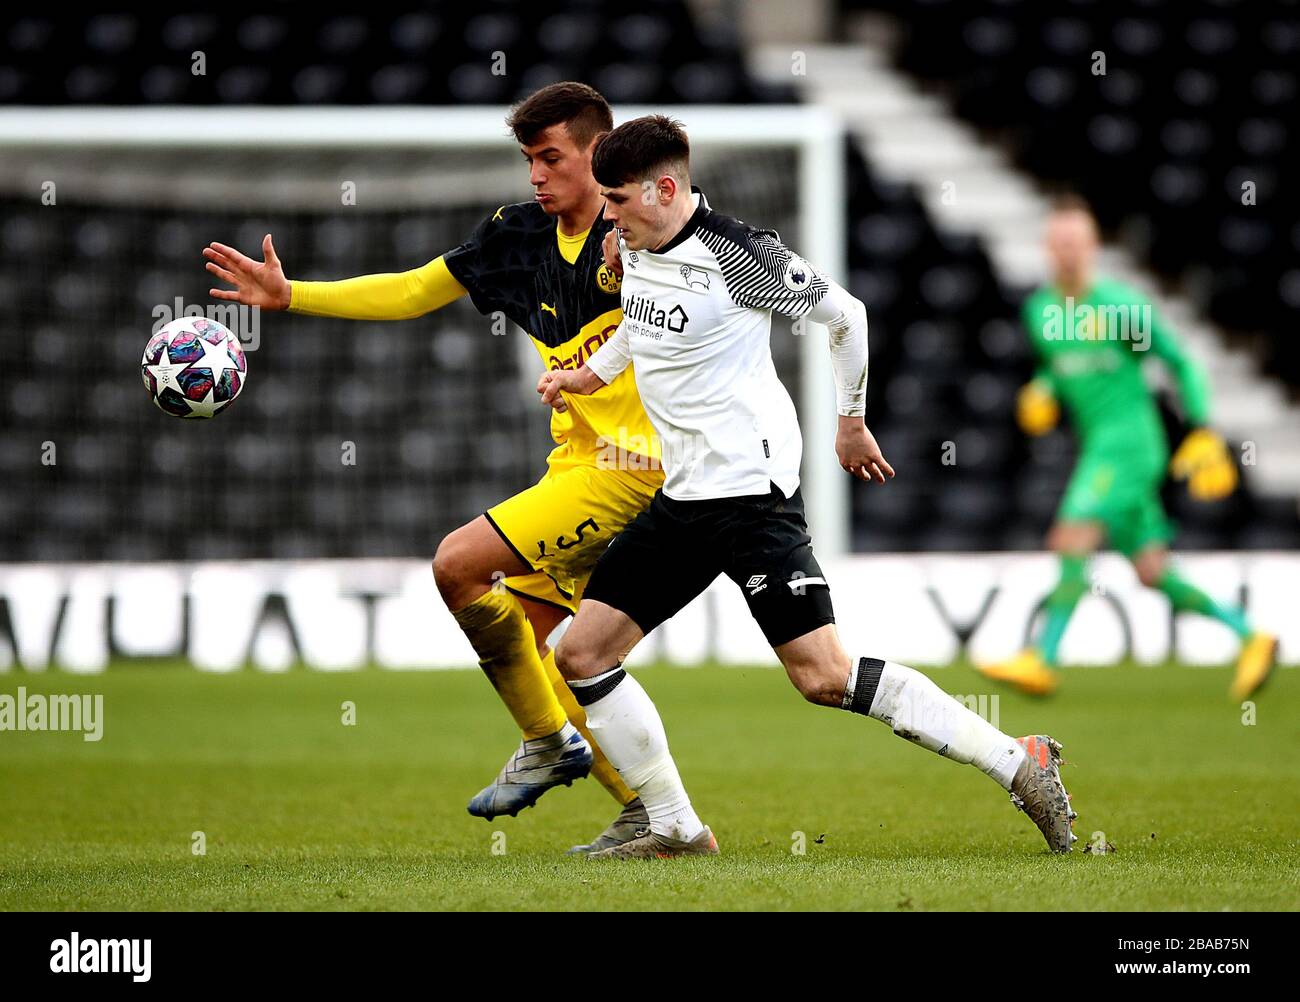 Derby County's Jack Stretton (right) and Borussia Dortmund's Ramzi Ferjani (left) battle for the ball Stock Photo